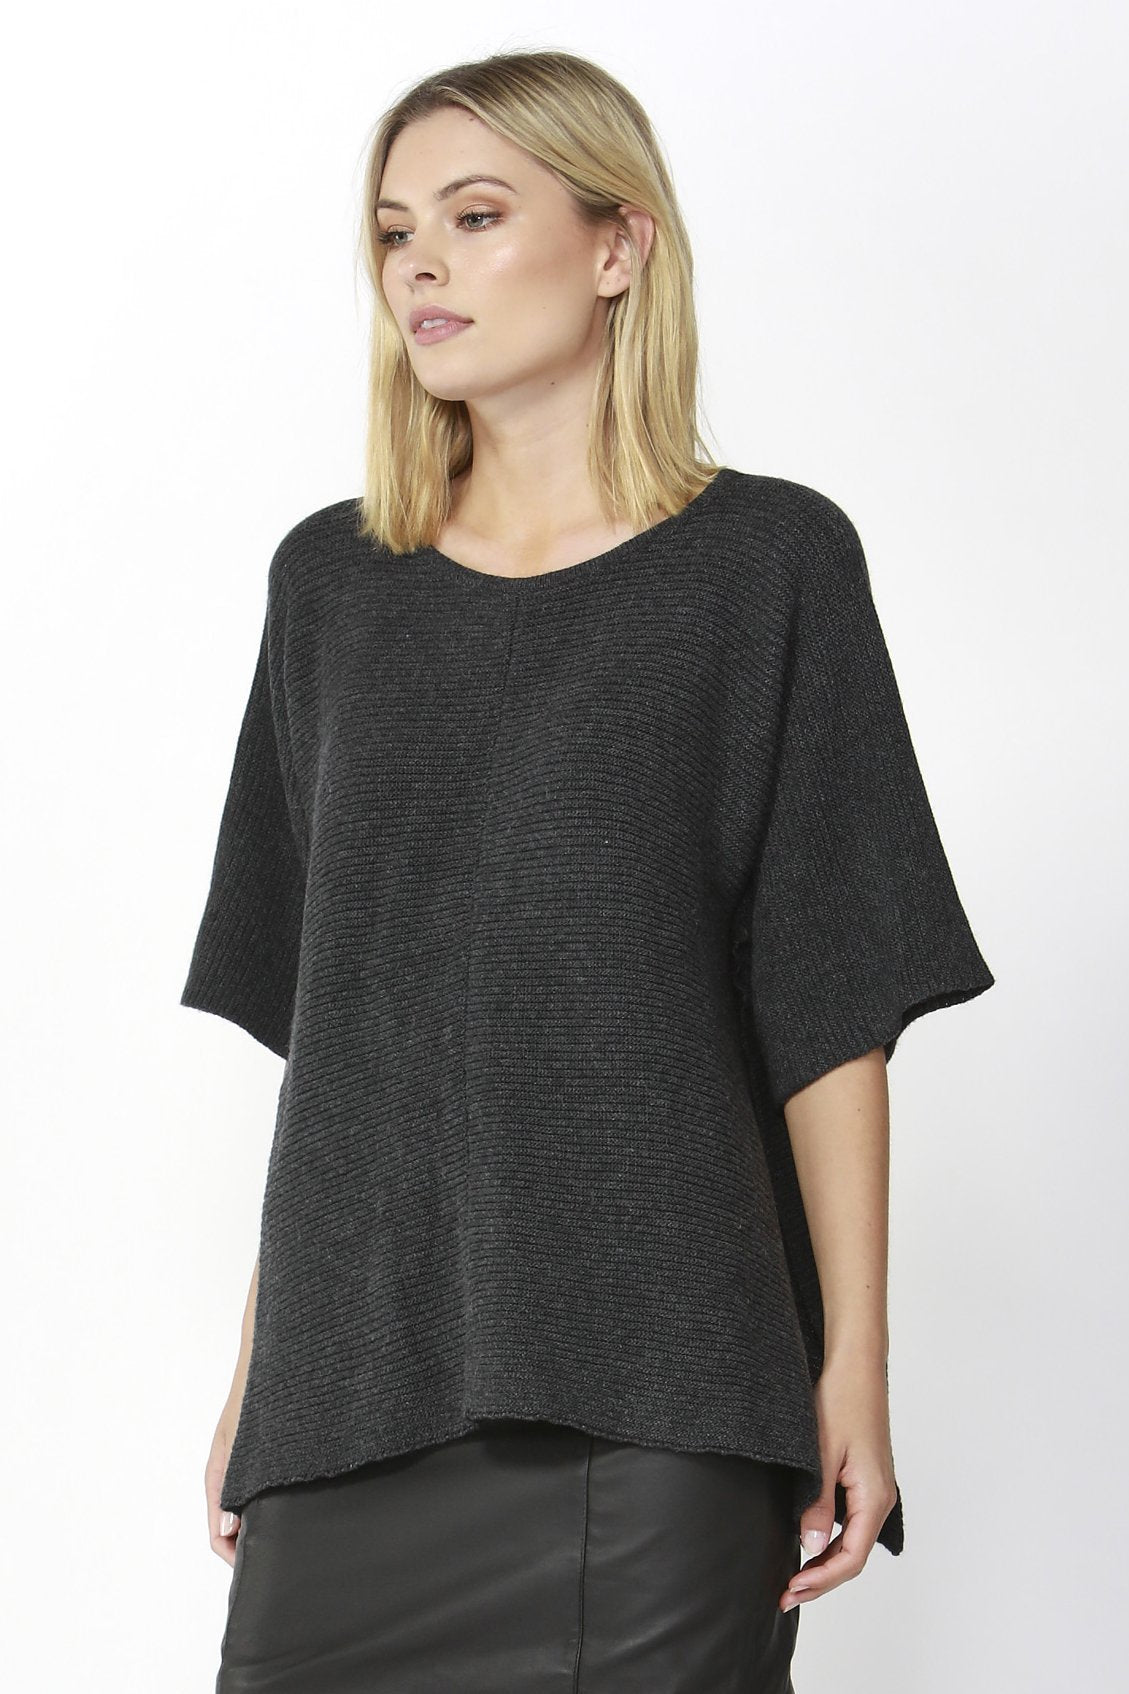 Fate + Becker Aveen Cropped Knit in Charcoal - Hey Sara